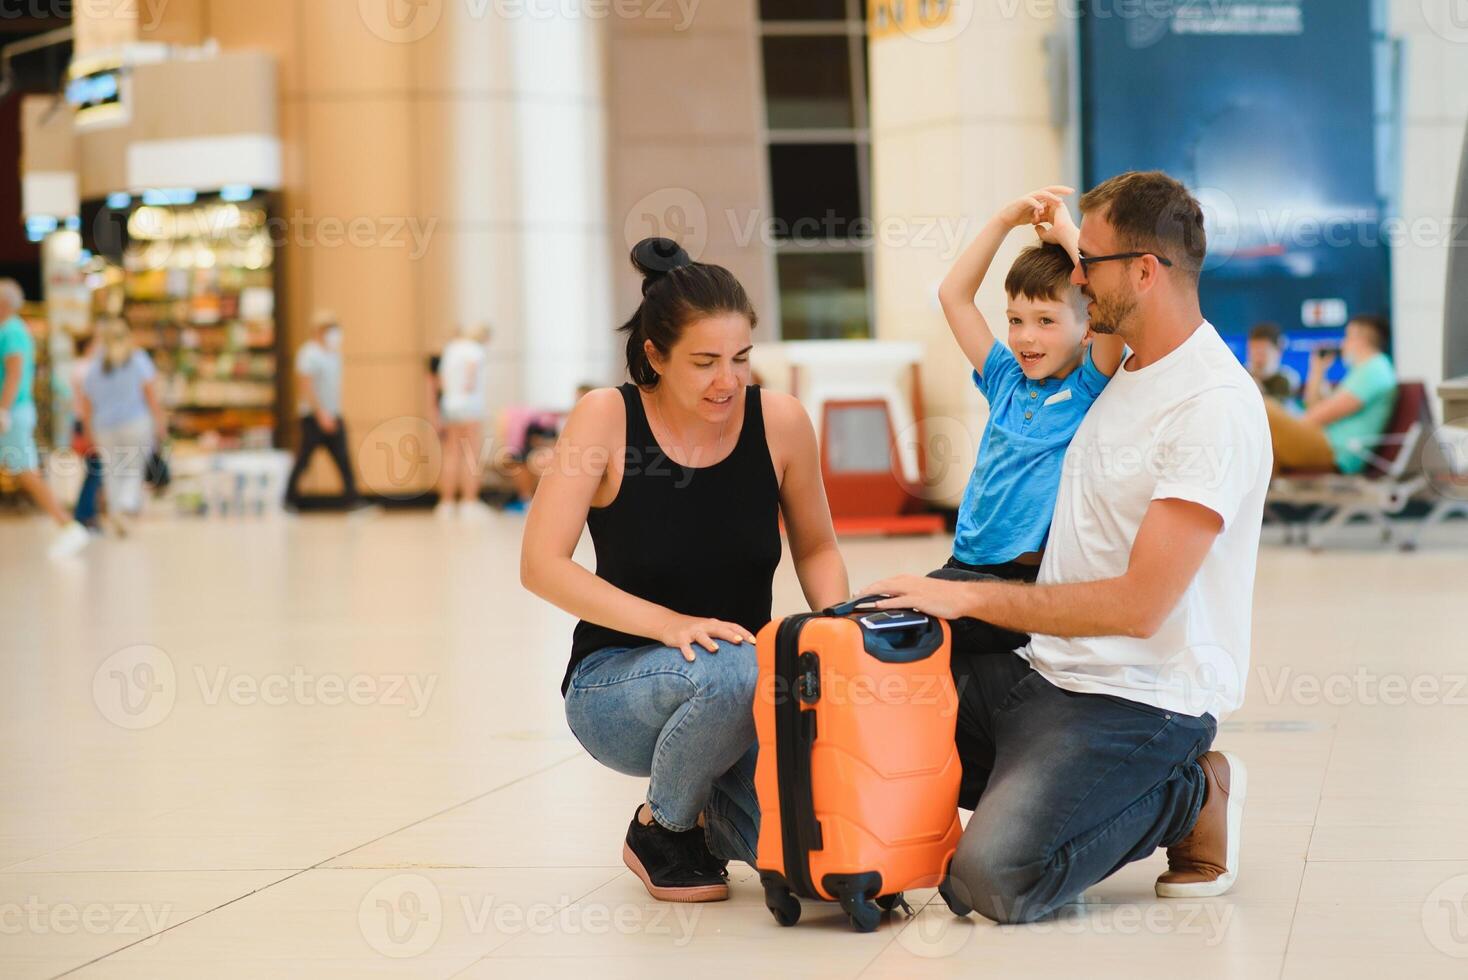 Portrait of traveling family with suitcases in airport photo